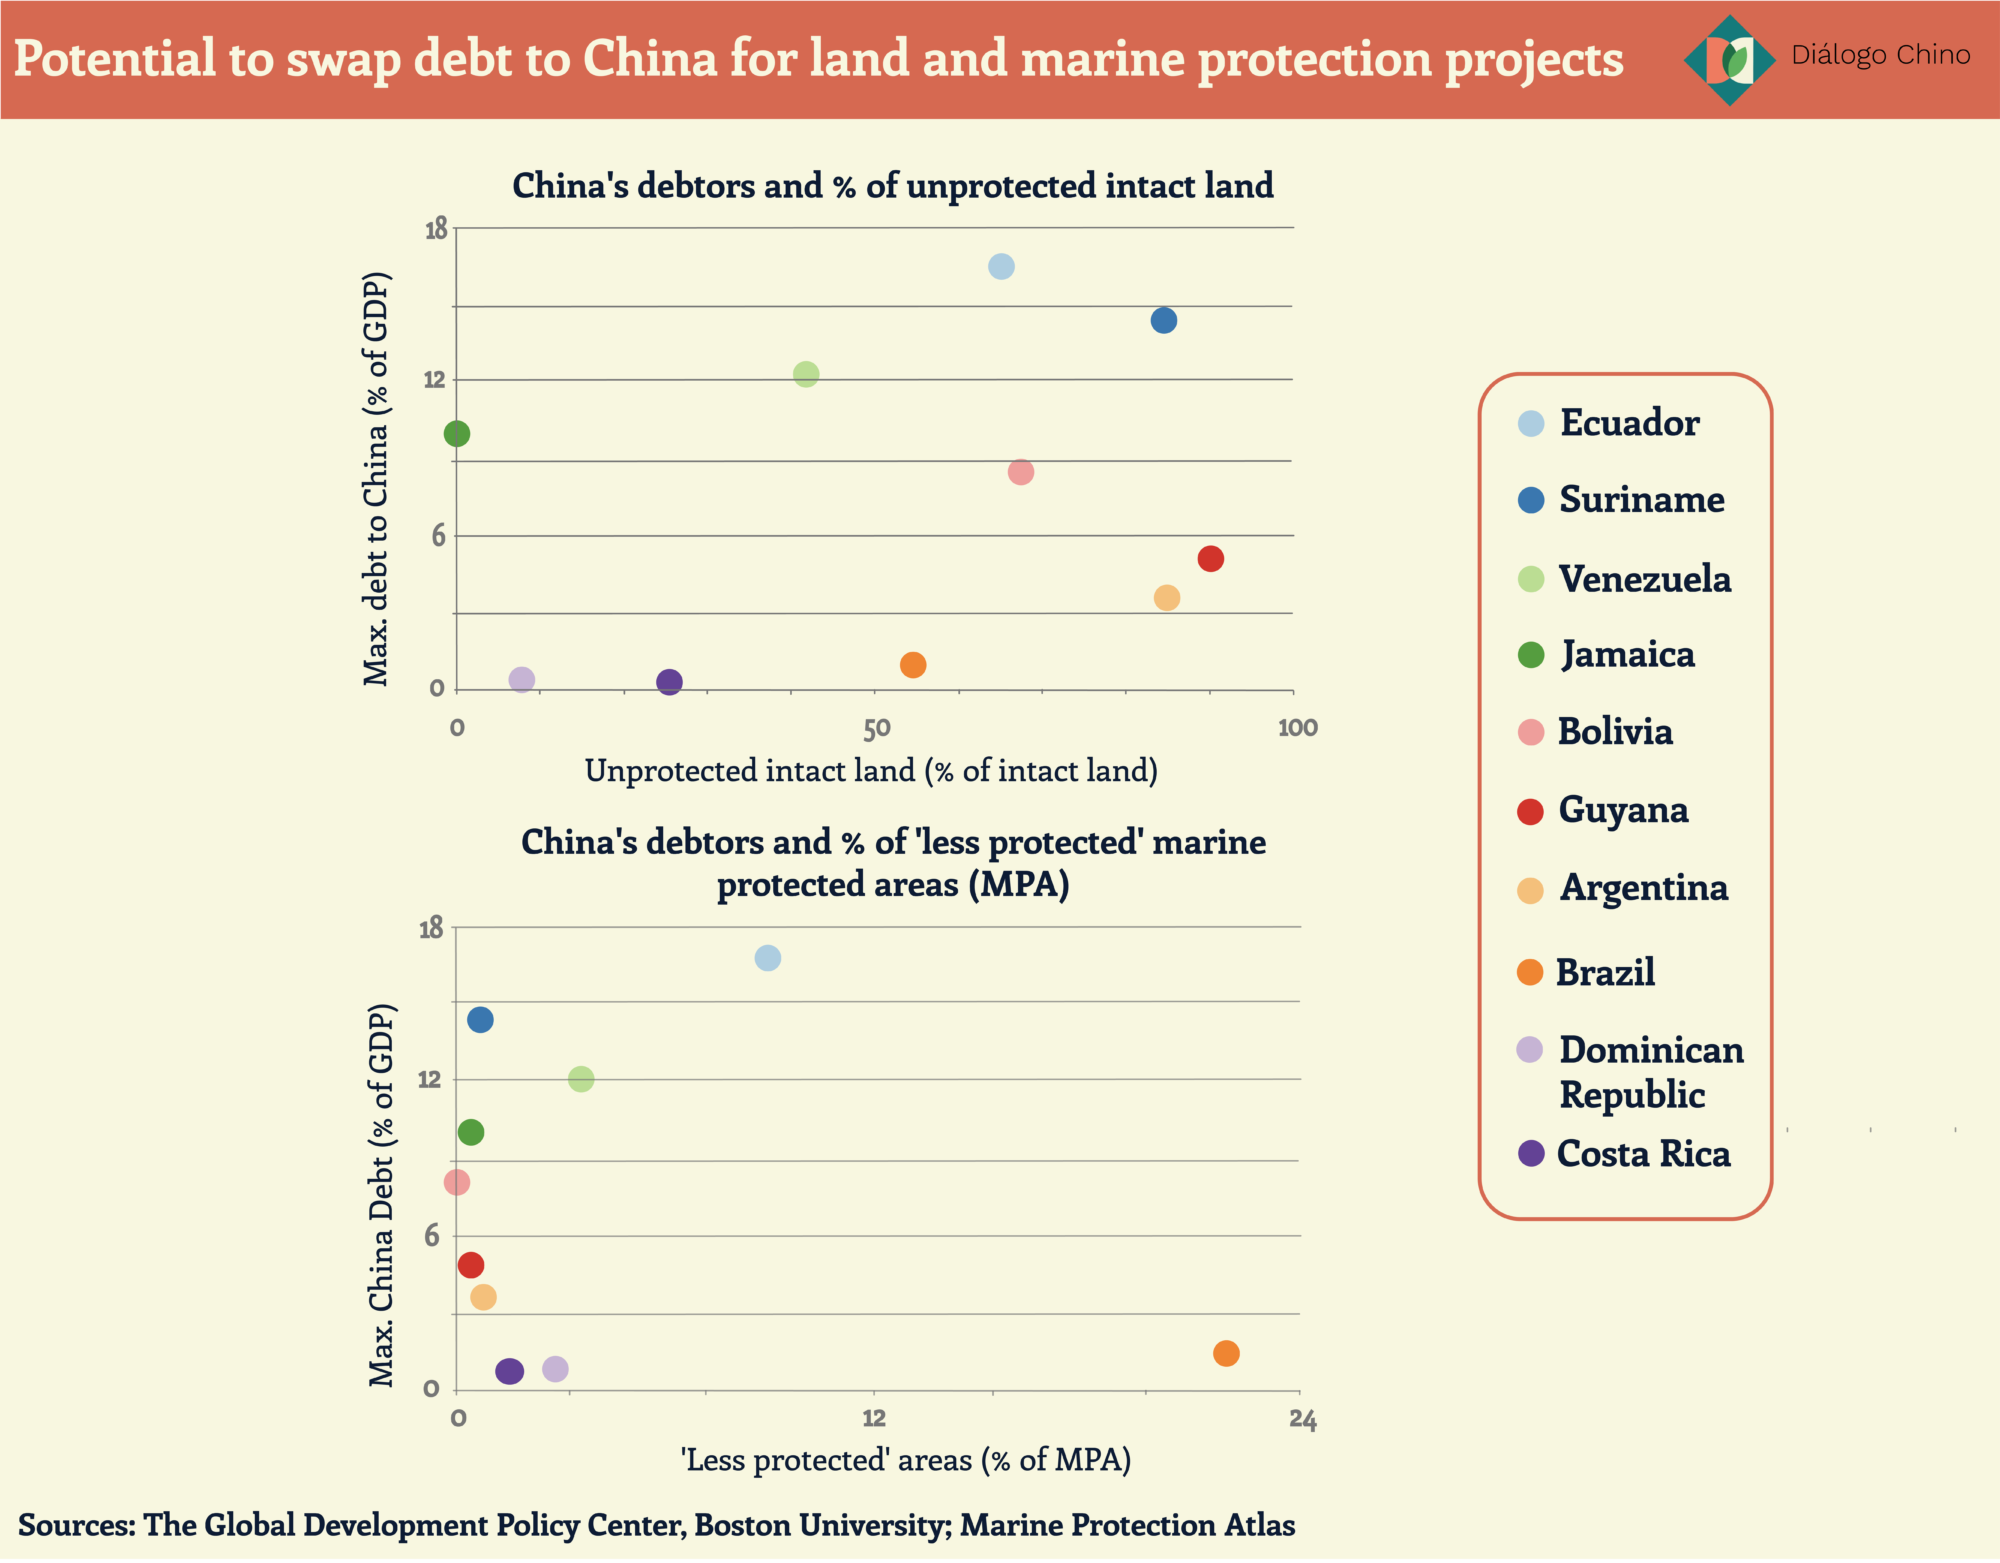 graph showing Latin America's potential to exchange doubts with China